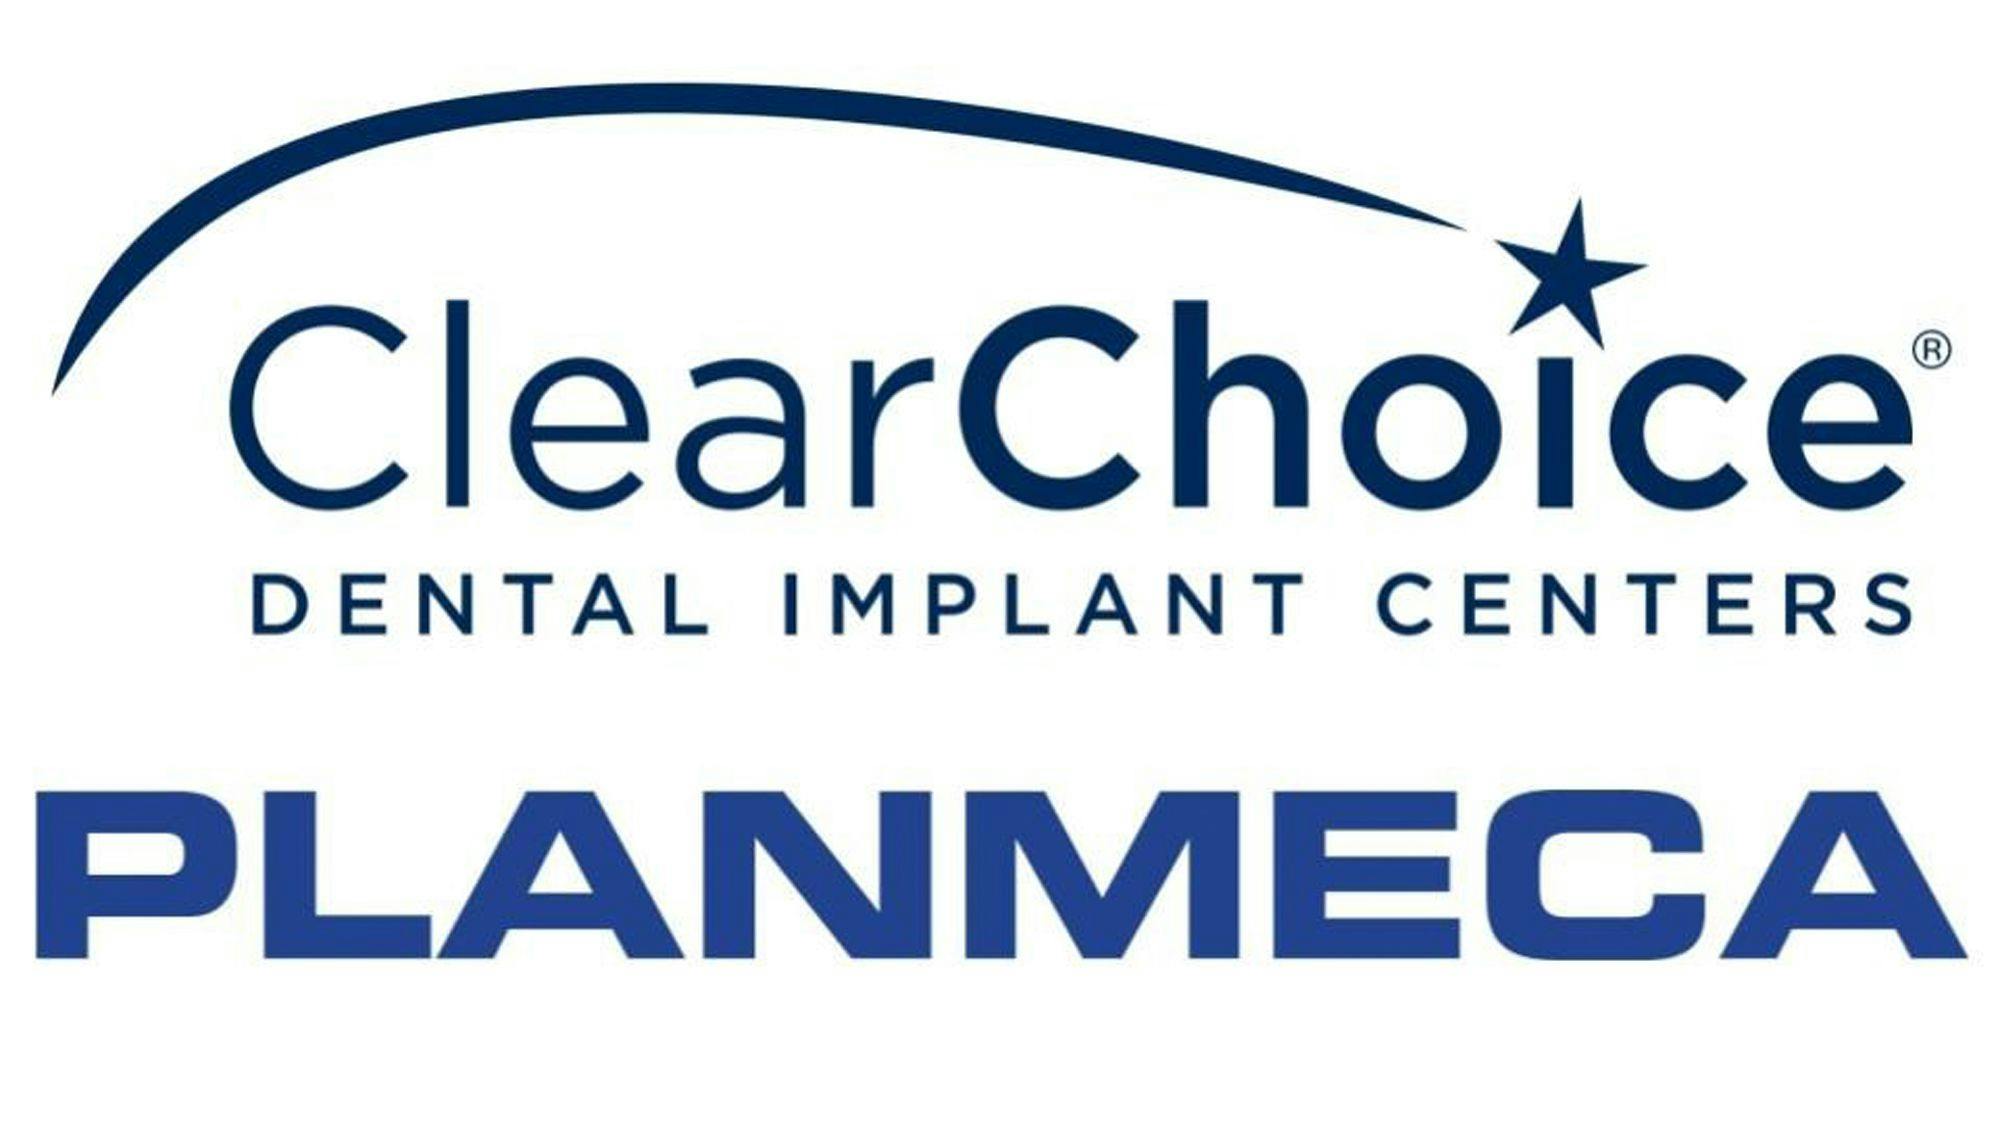 ClearChoice Partners with Planmeca for Enhanced Digital Imaging for Dental Implant Patients